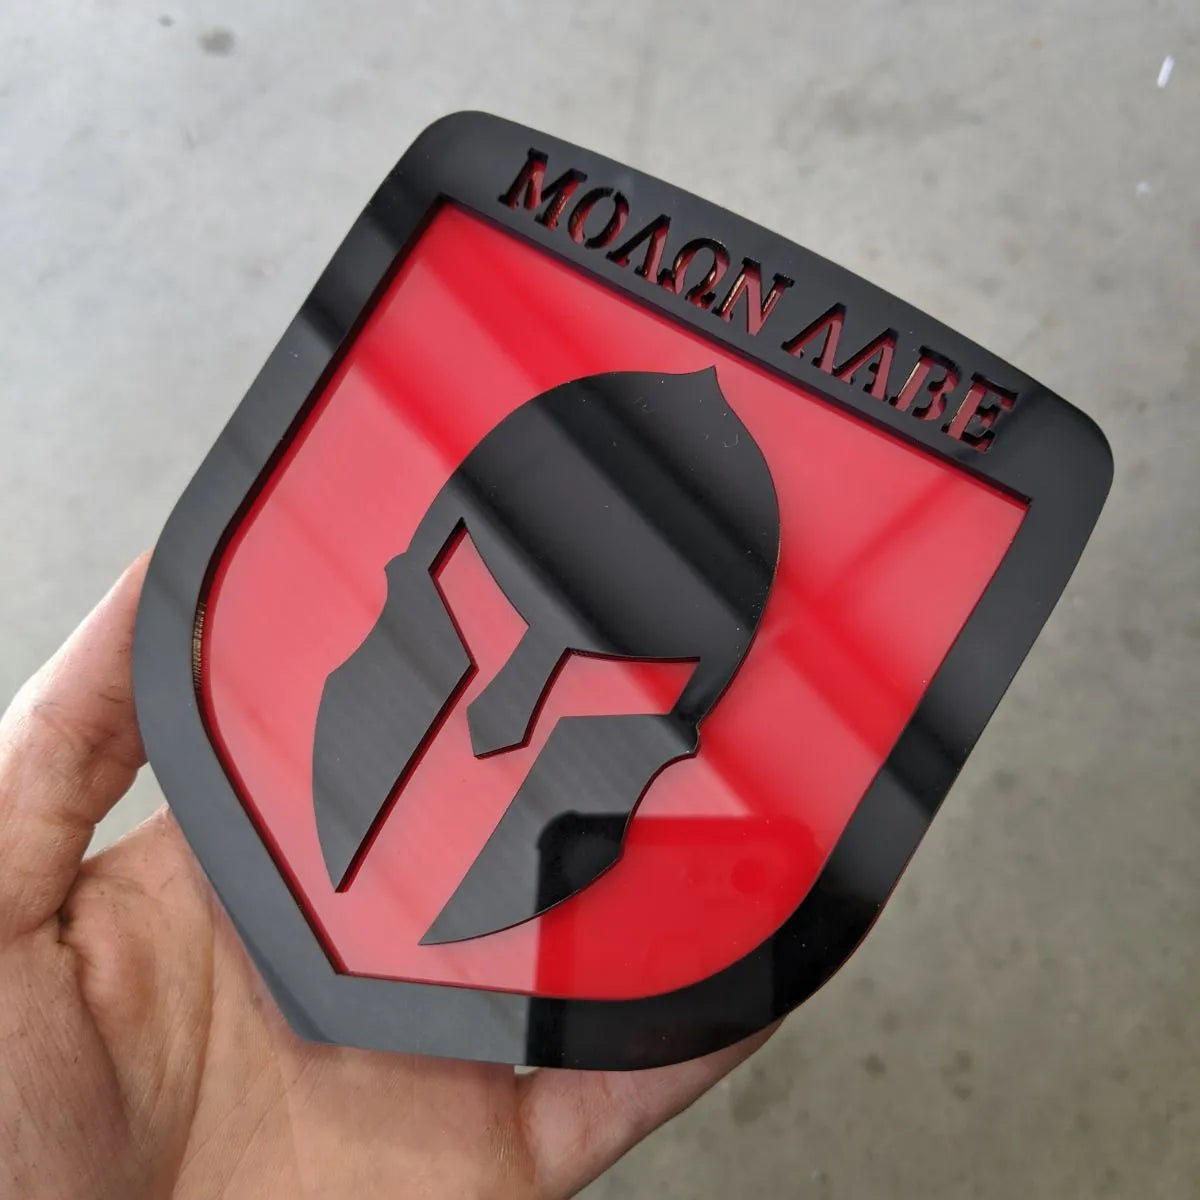 Molon Labe Badge - Fits 2009-2012 Dodge® Ram® Grille -1500, 2500, 3500 - Black on Red